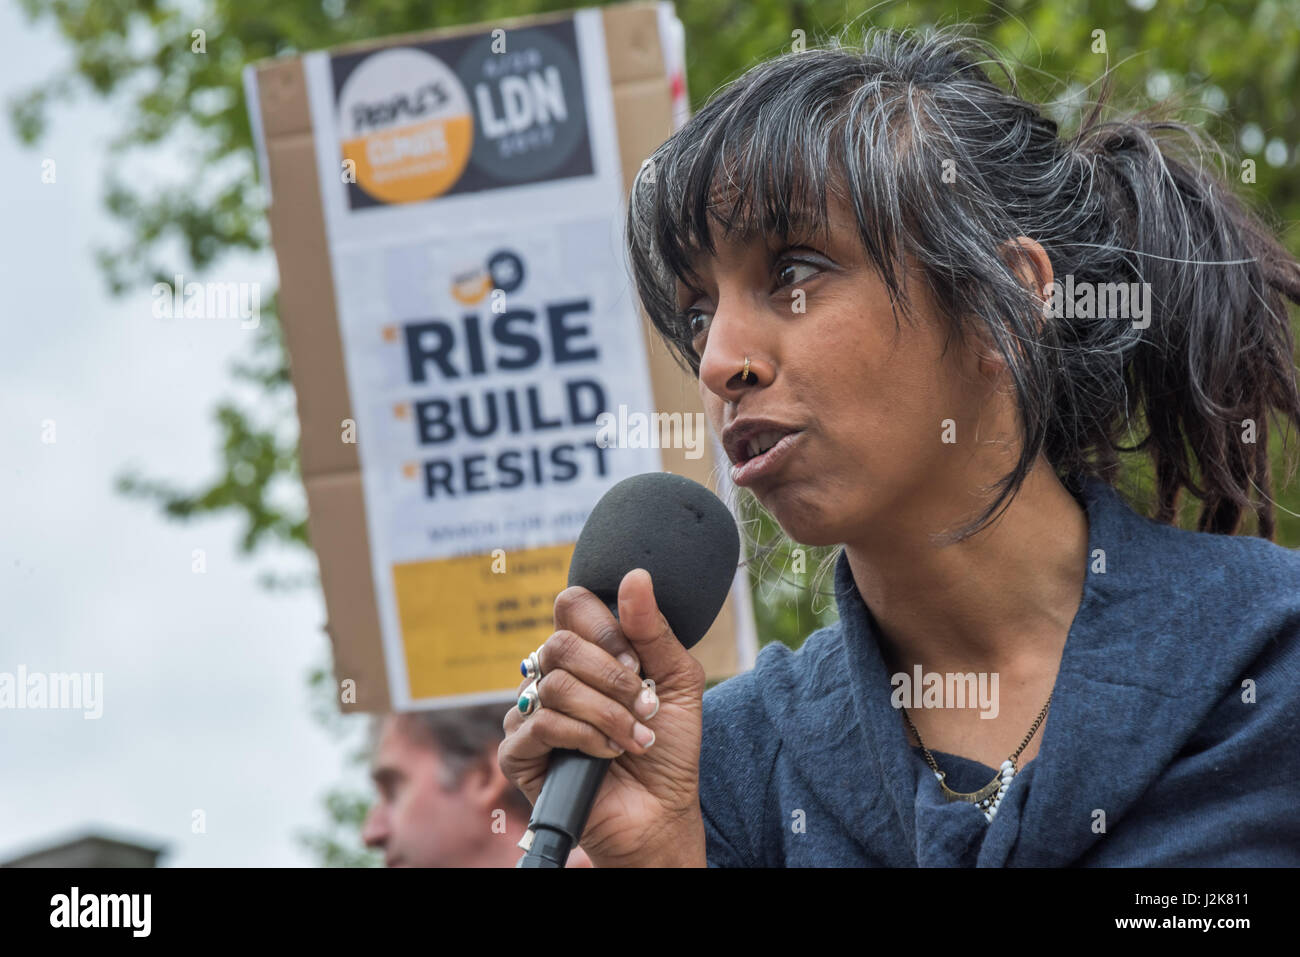 London, UK. 29th April 2017. Sheila Menon, Plane Stupid, speaks about the need to become active to oppose the governments envrionmentally disastrous polices - such as aviation expansion - at the Campaign against Climate Change rally to show solidarity with the People's Climate March in the US, and to tell Theresa May not to follow Trump down the path to climate disaster. After speeches opposite Parliament, people carried giant letters spelling out 'TRUMP & MAY CLIMATE DISASTER' and walked with them to Westminster Bridge for photographs. Unfortunately the letters proved difficult to see from th Stock Photo